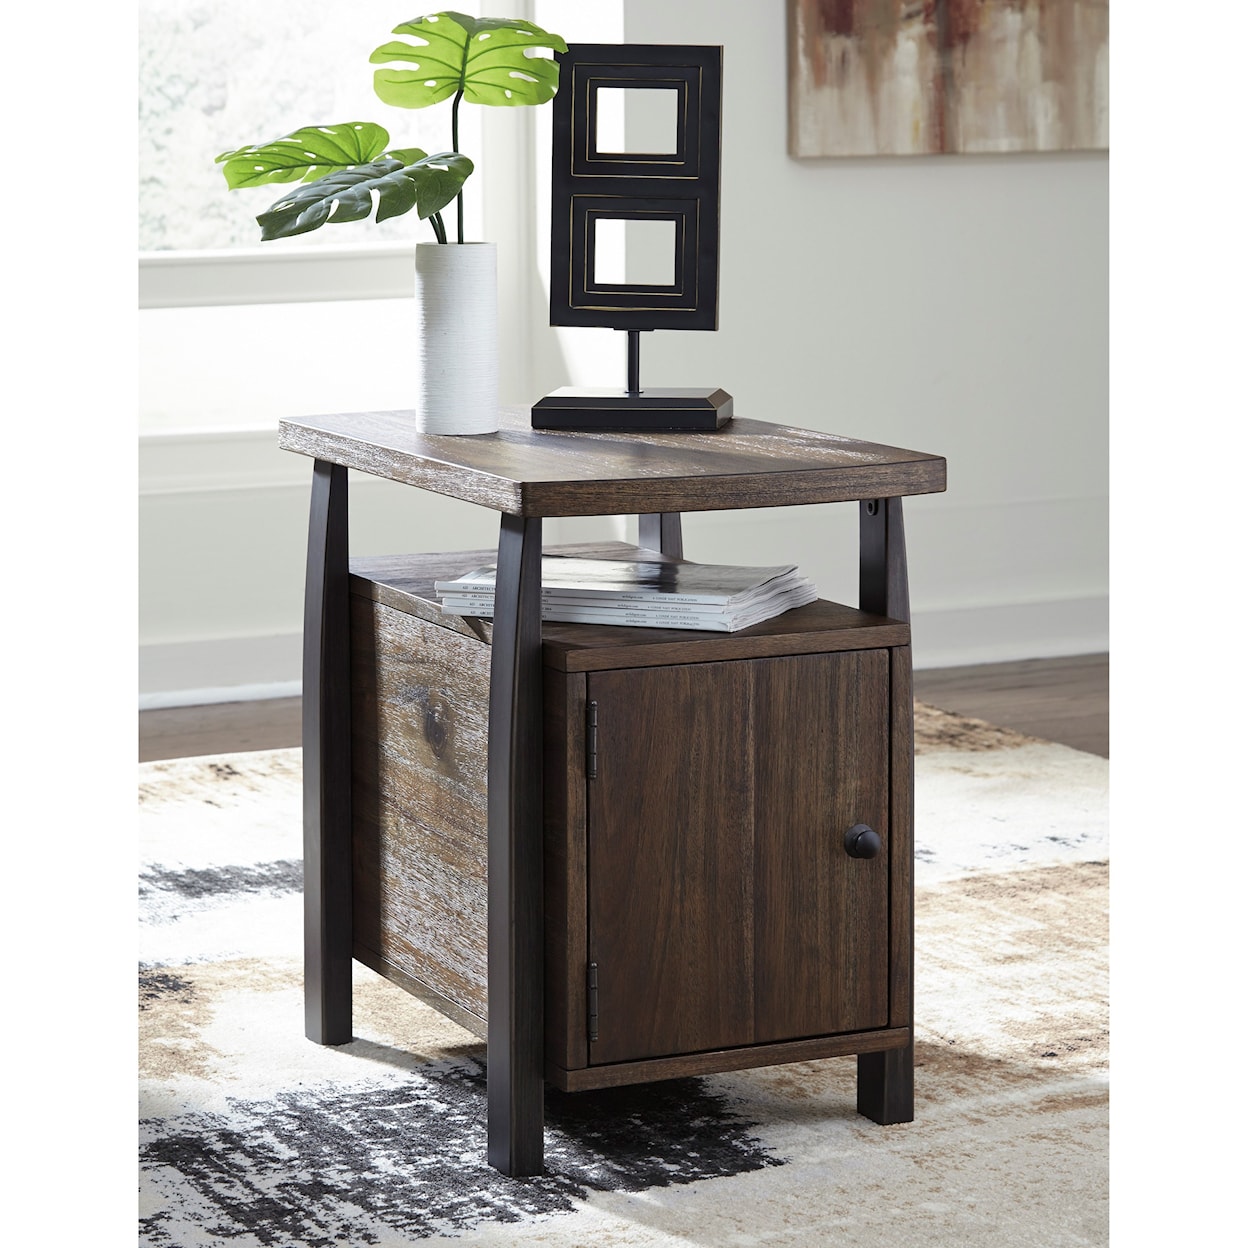 Signature Design by Ashley Vailbry Chairside Table